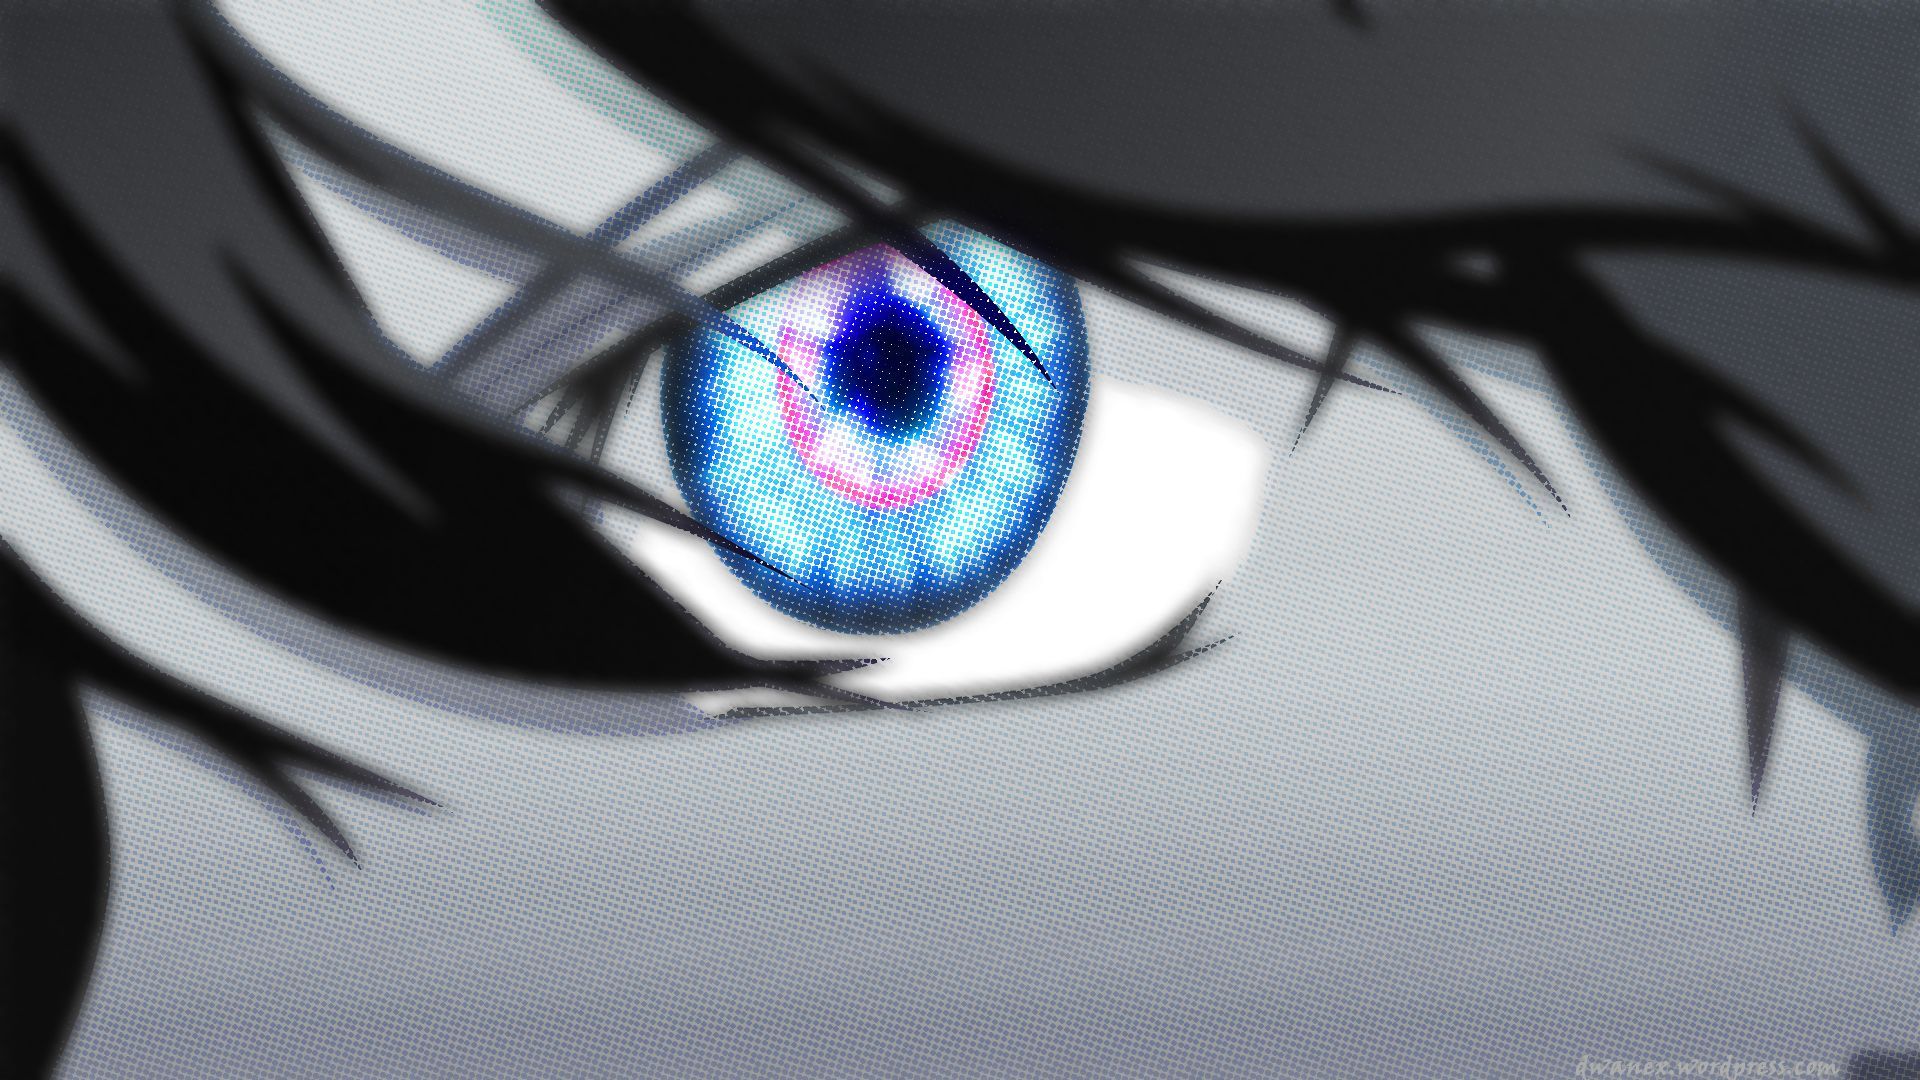 Anime Eyes Background Images, HD Pictures and Wallpaper For Free